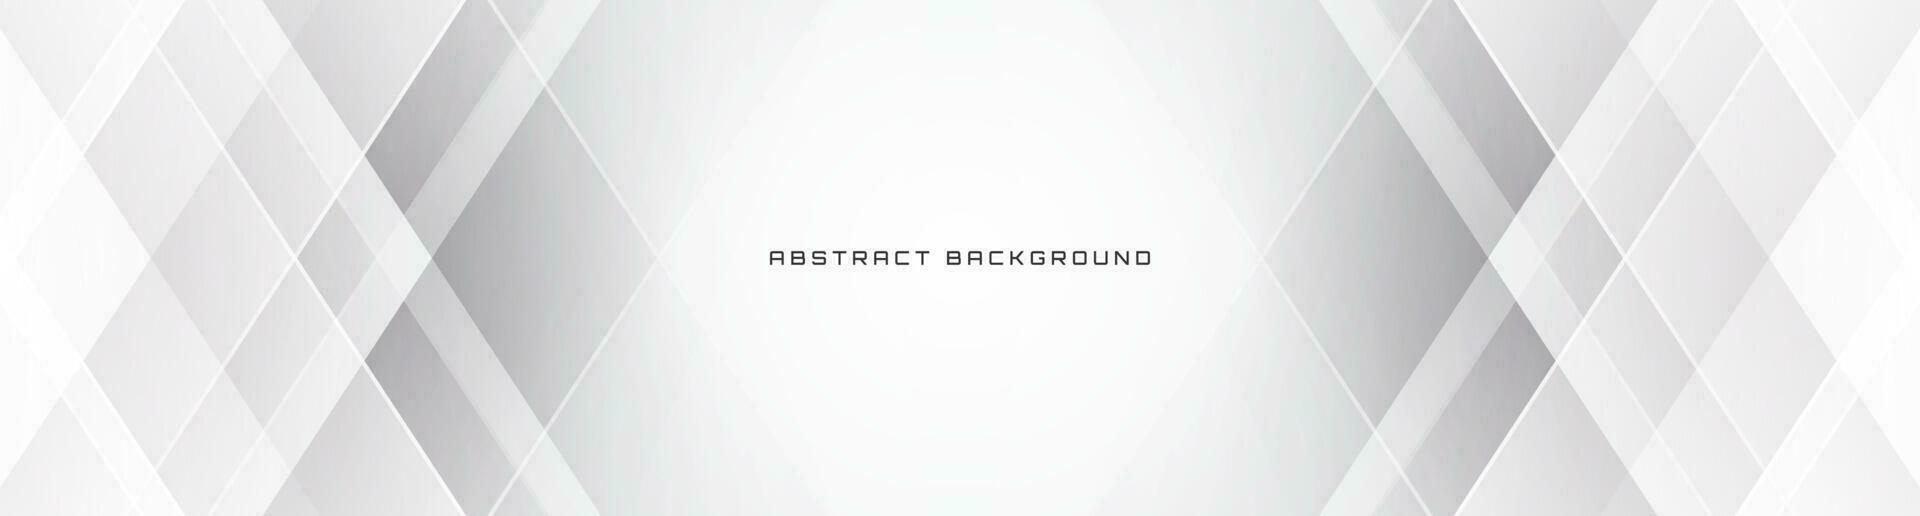 3D white geometric abstract background overlap layer on bright space with cutout decoration. Minimalist graphic design element modern polygon style concept for banner, flyer, card, cover, or brochure vector